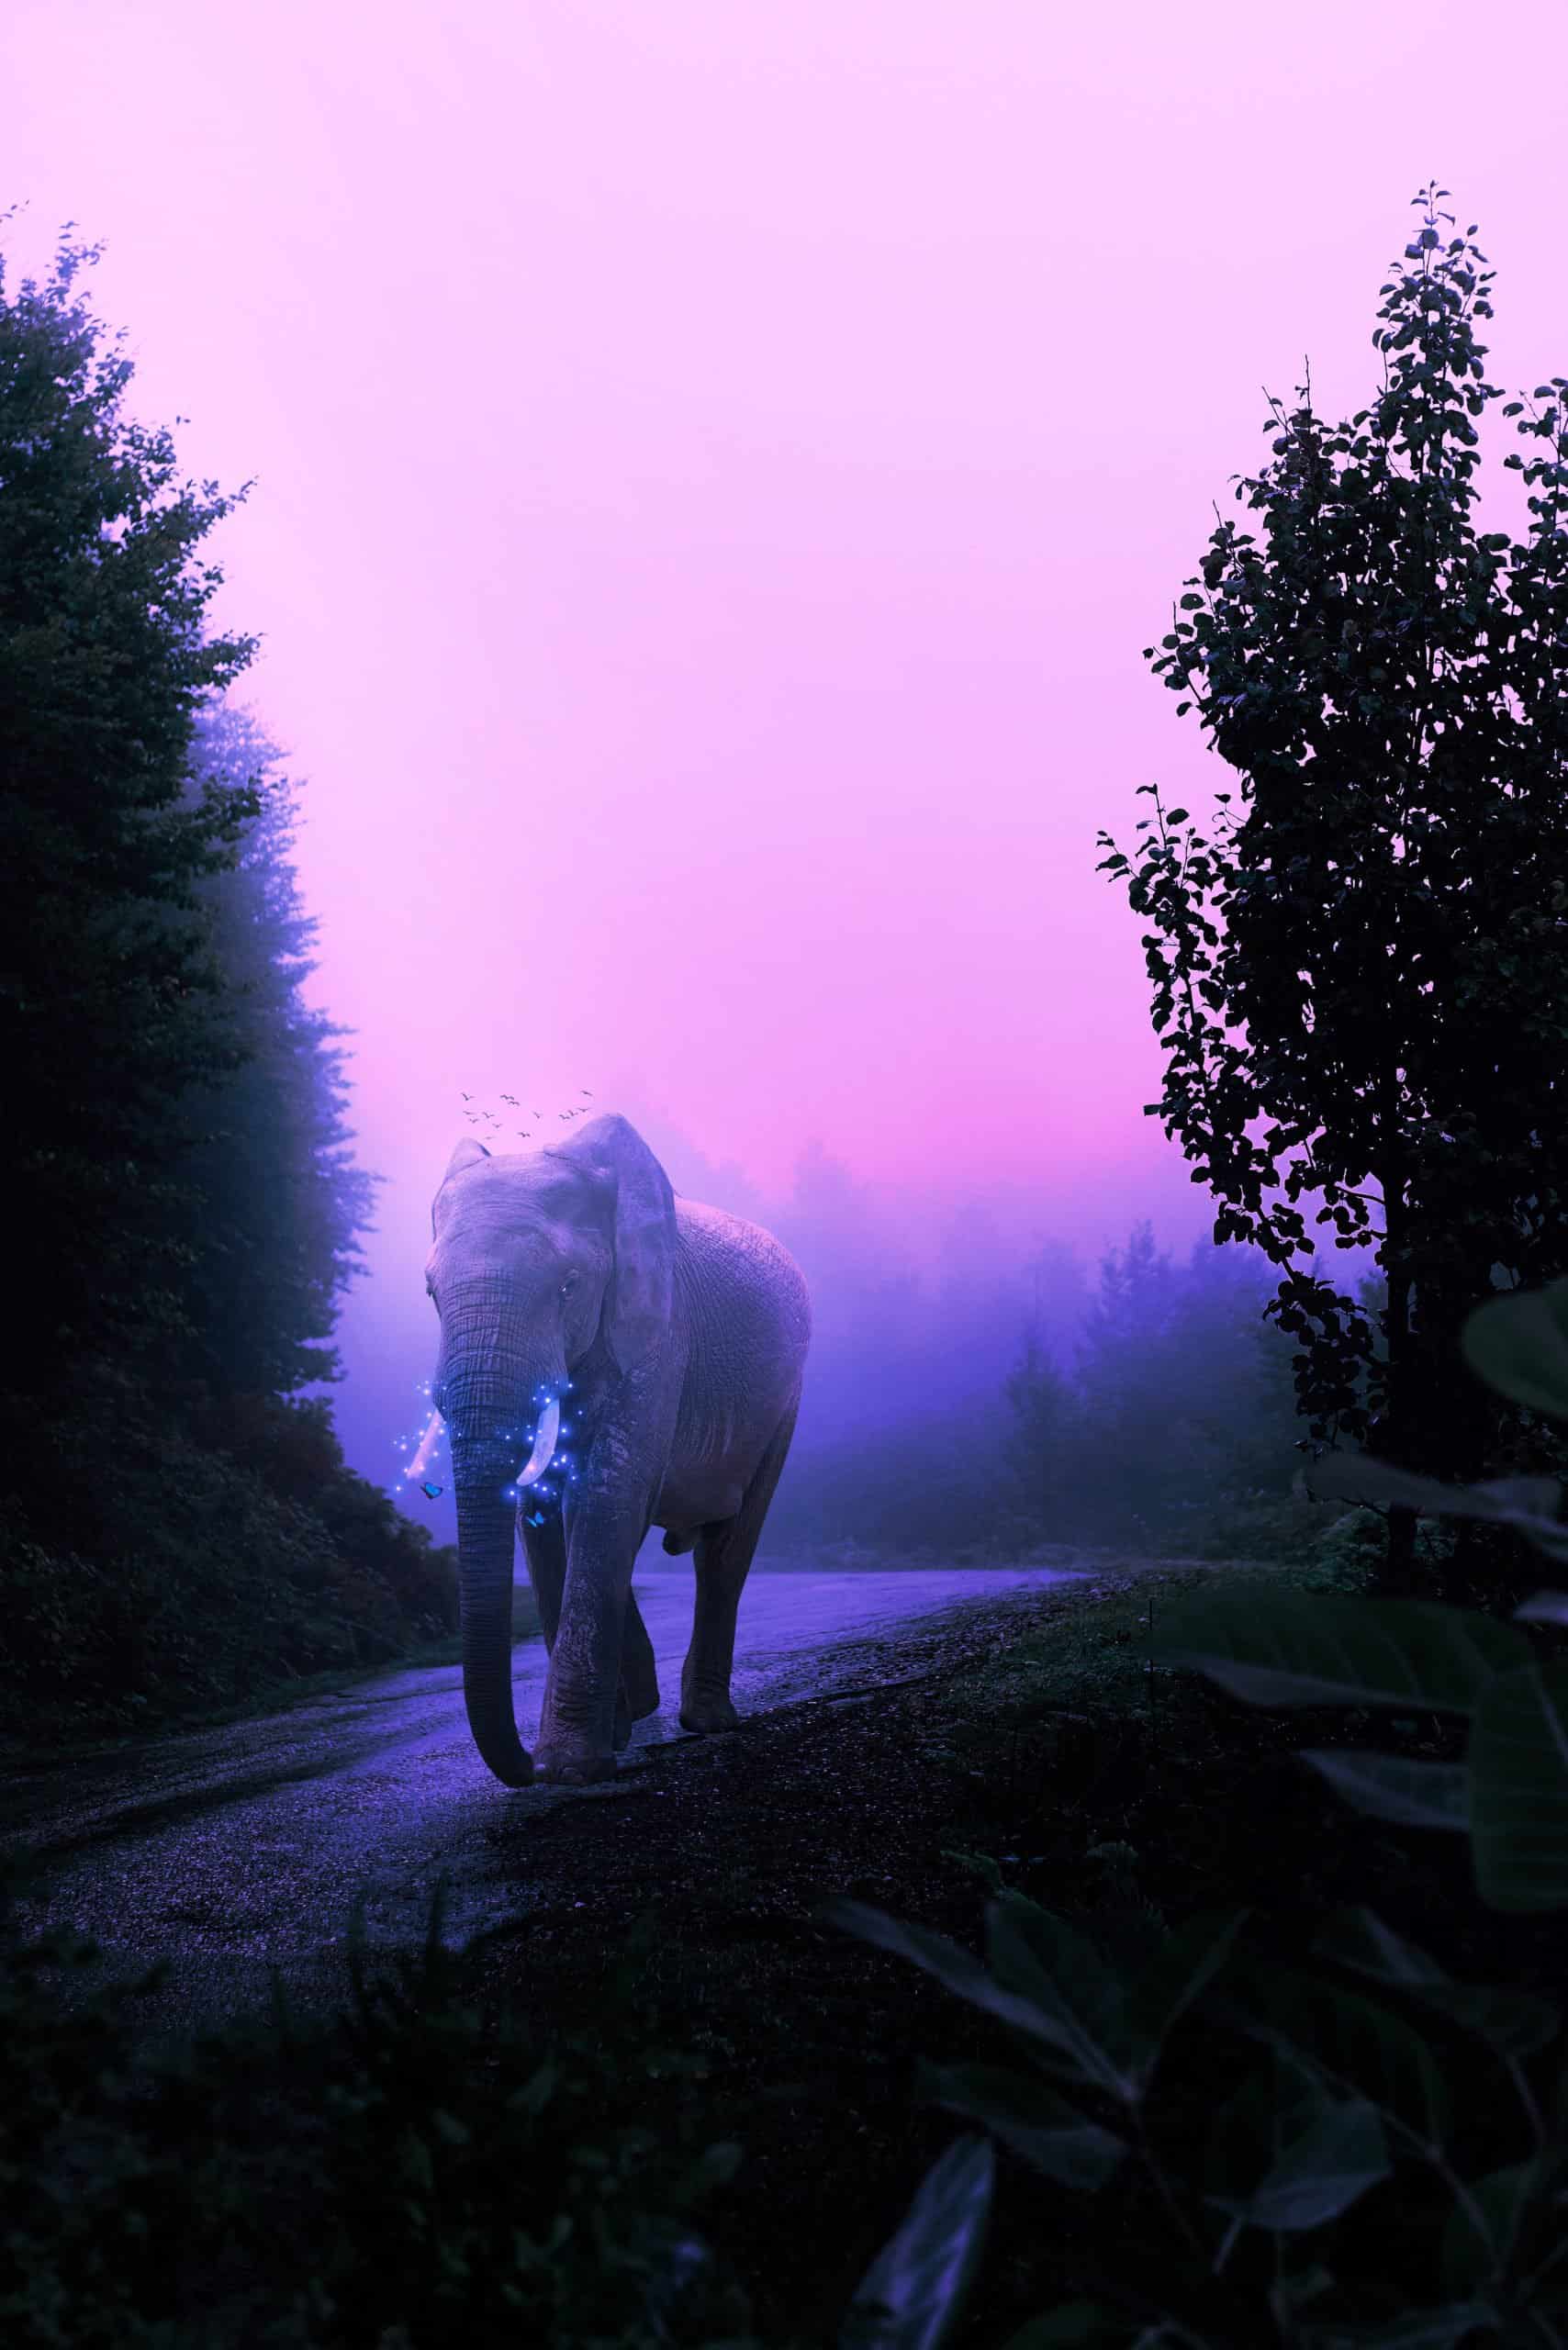 How to Create a Mystical Glowing Elephant in Photoshop